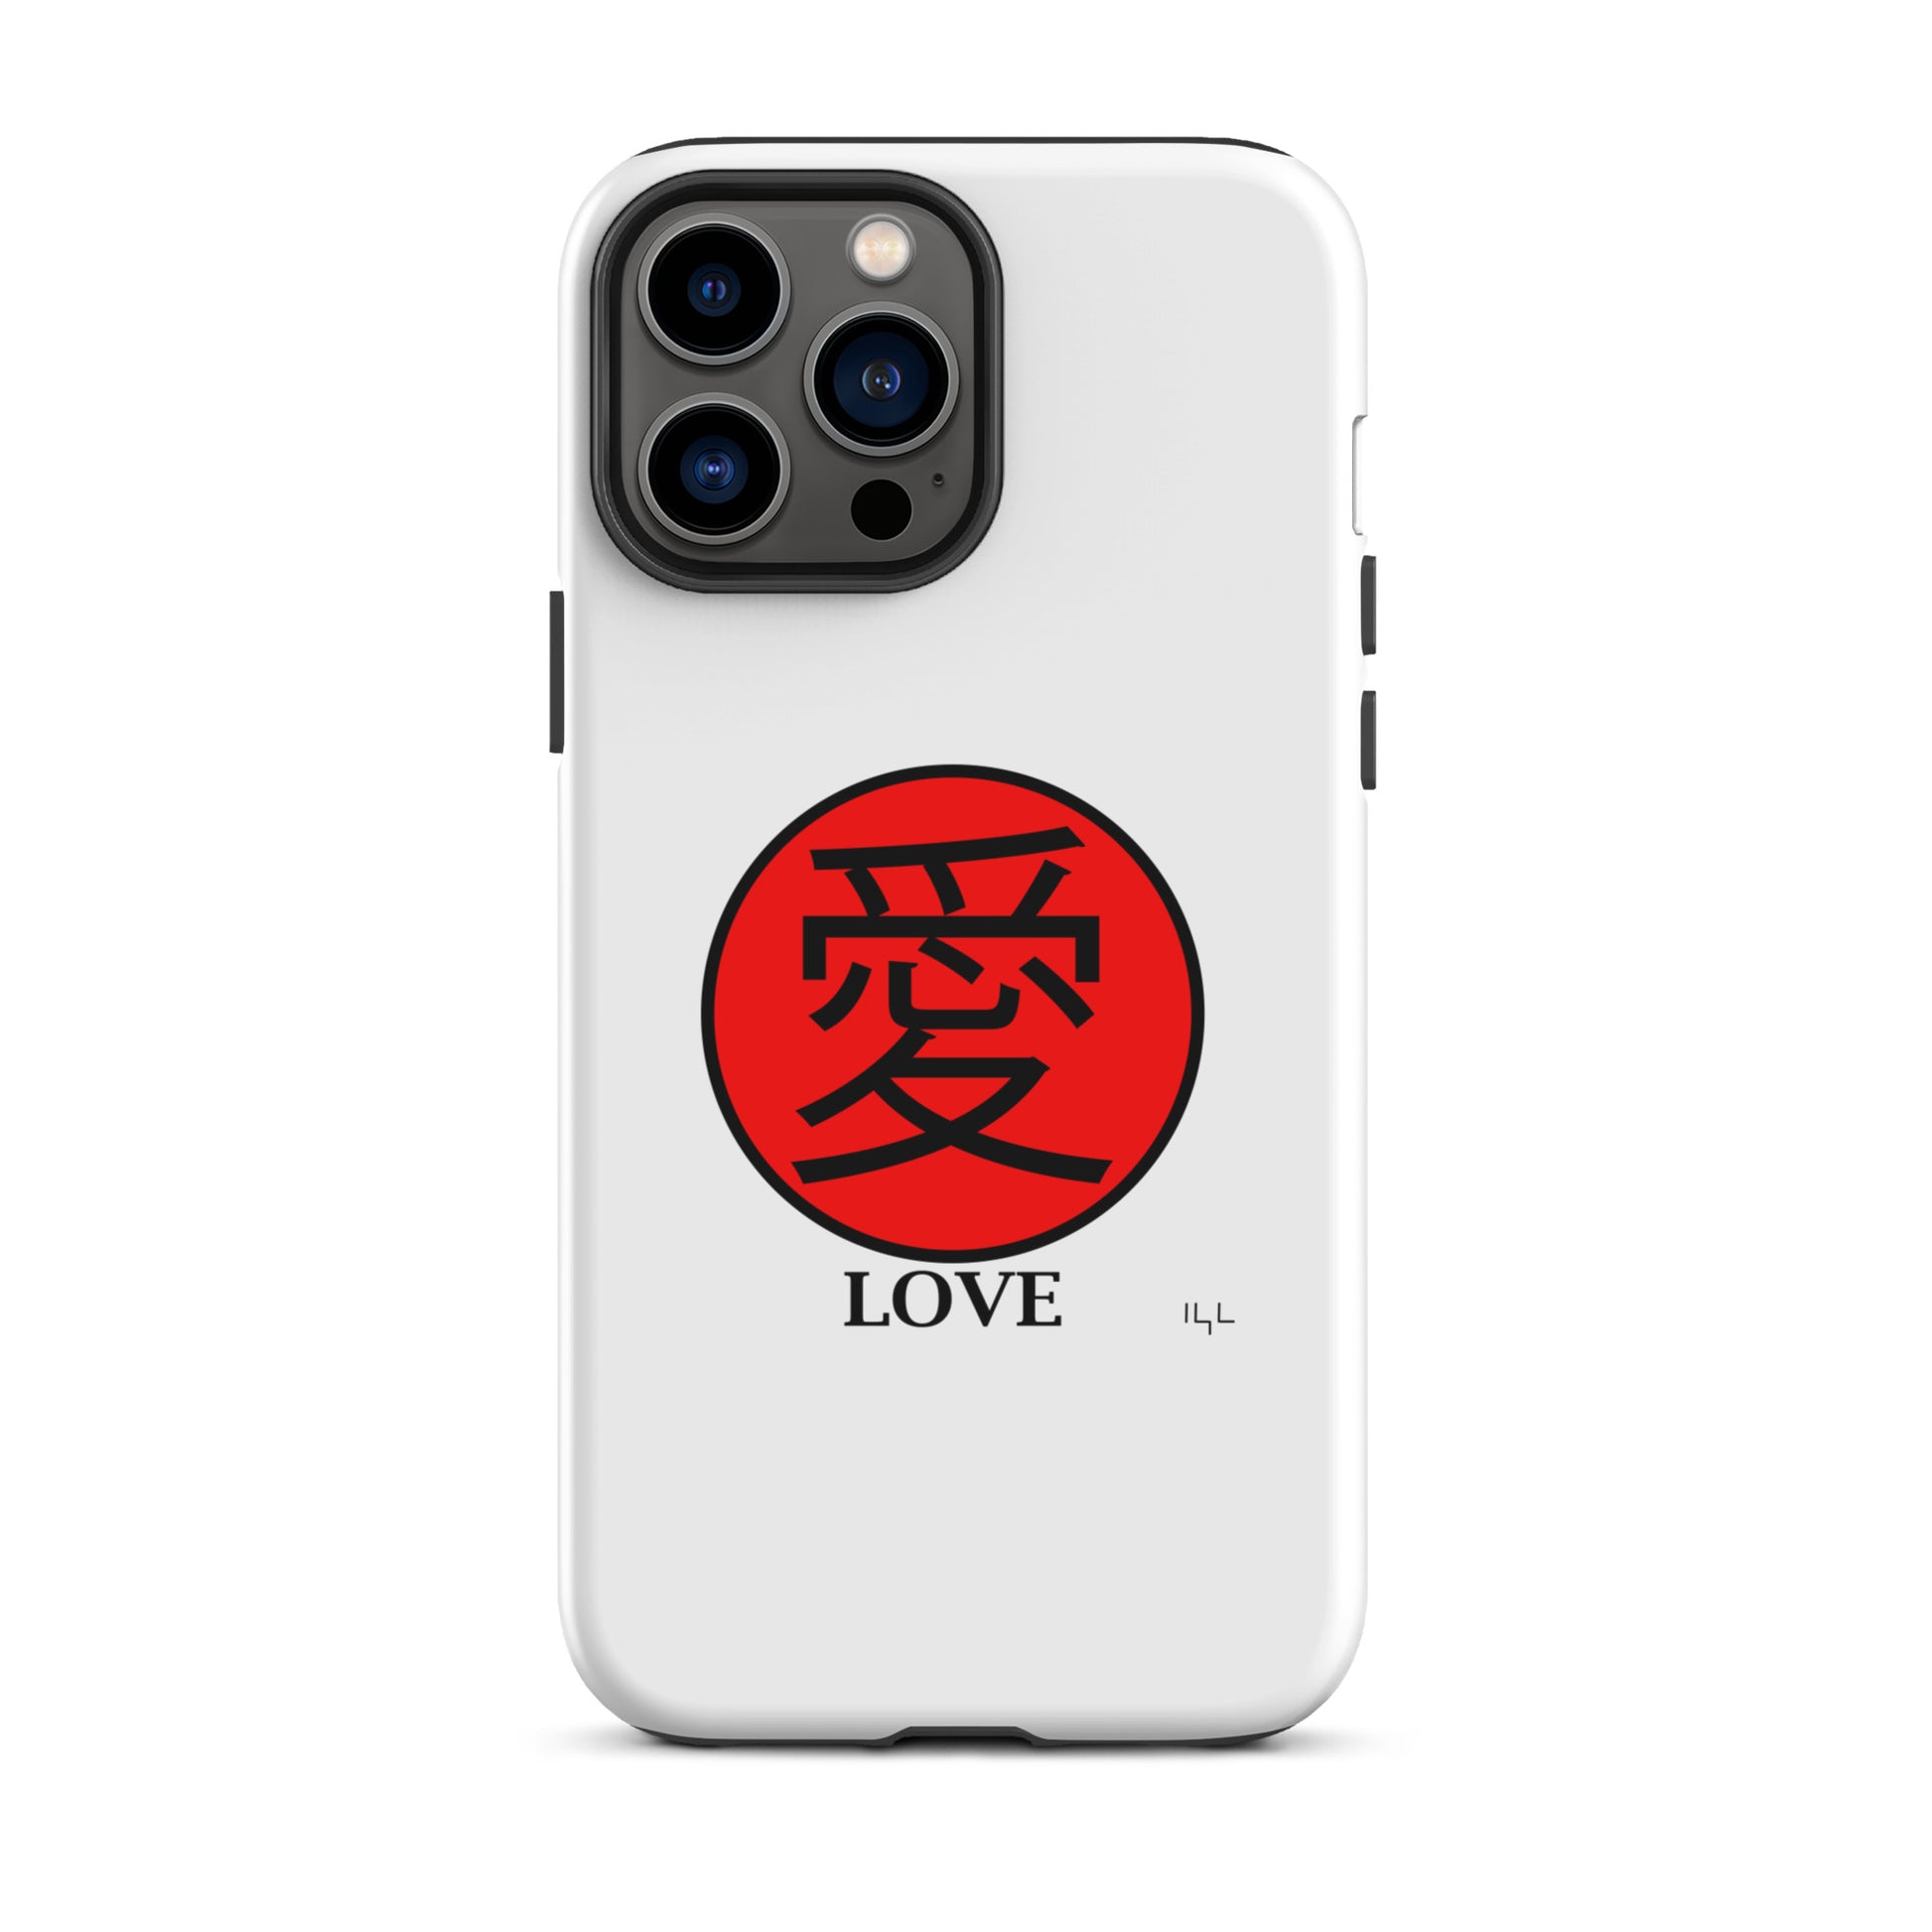 LOVE 愛 Japanese Tough iPhone case - -Lighten Your Life [ItsAboutTime.Life][date]